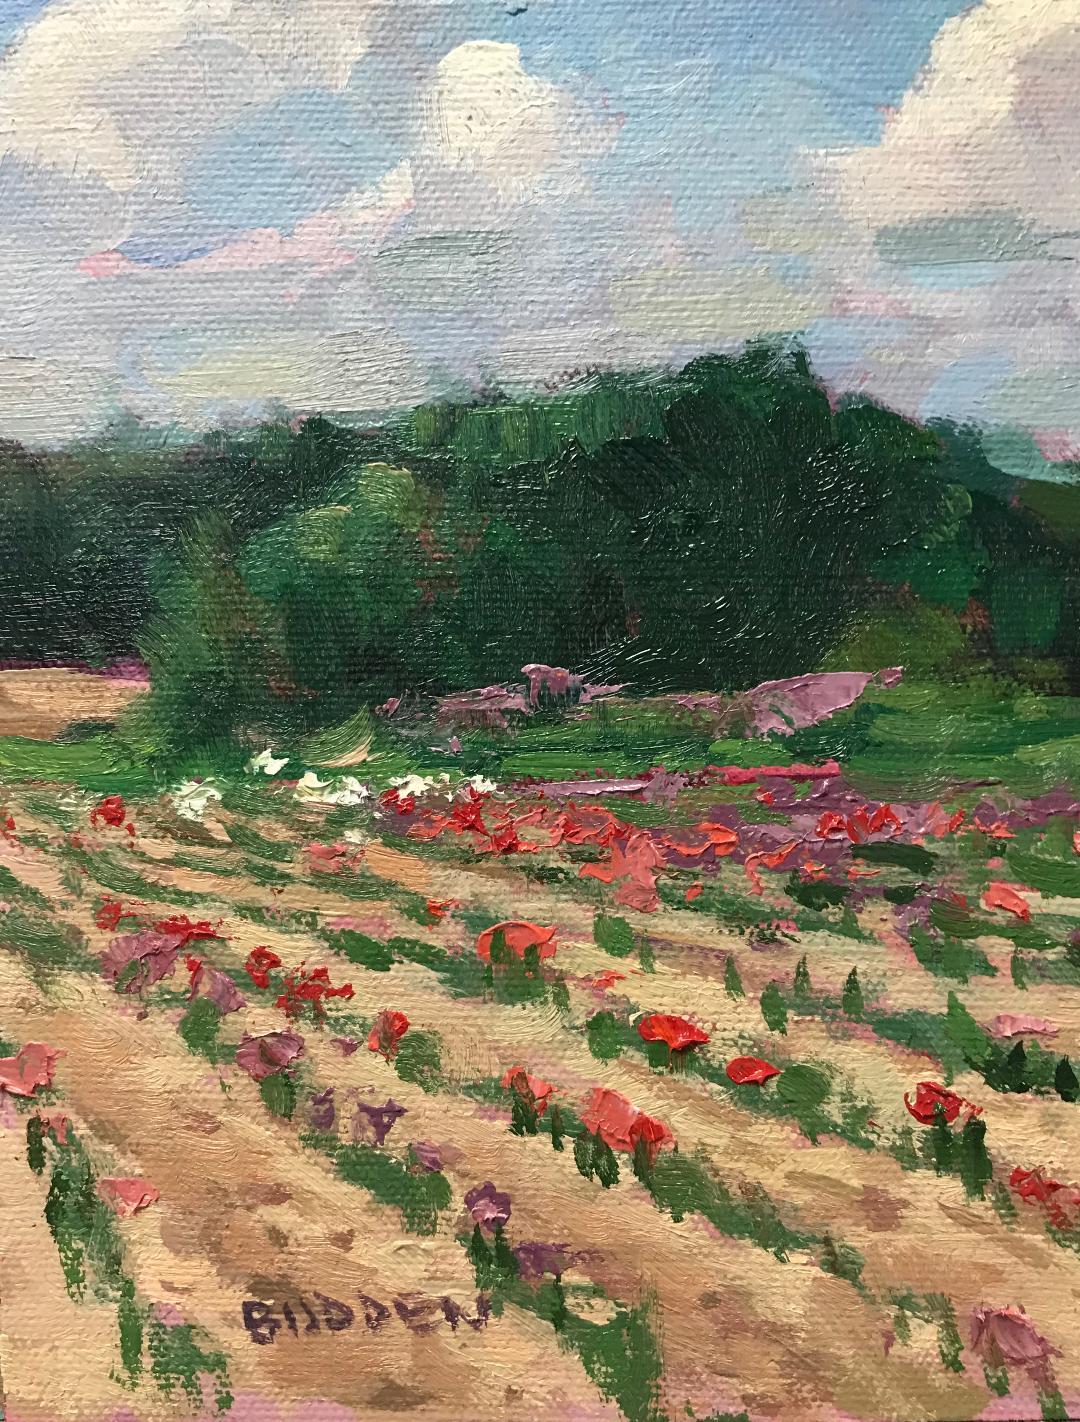 An oil painting on canvas that showcases the beautiful light of a summer day shinning on a field of flowers. This painting was painted en plein air on location in an Impressionistic style and is being sold unframed.

ARTIST'S STATEMENT
I have been